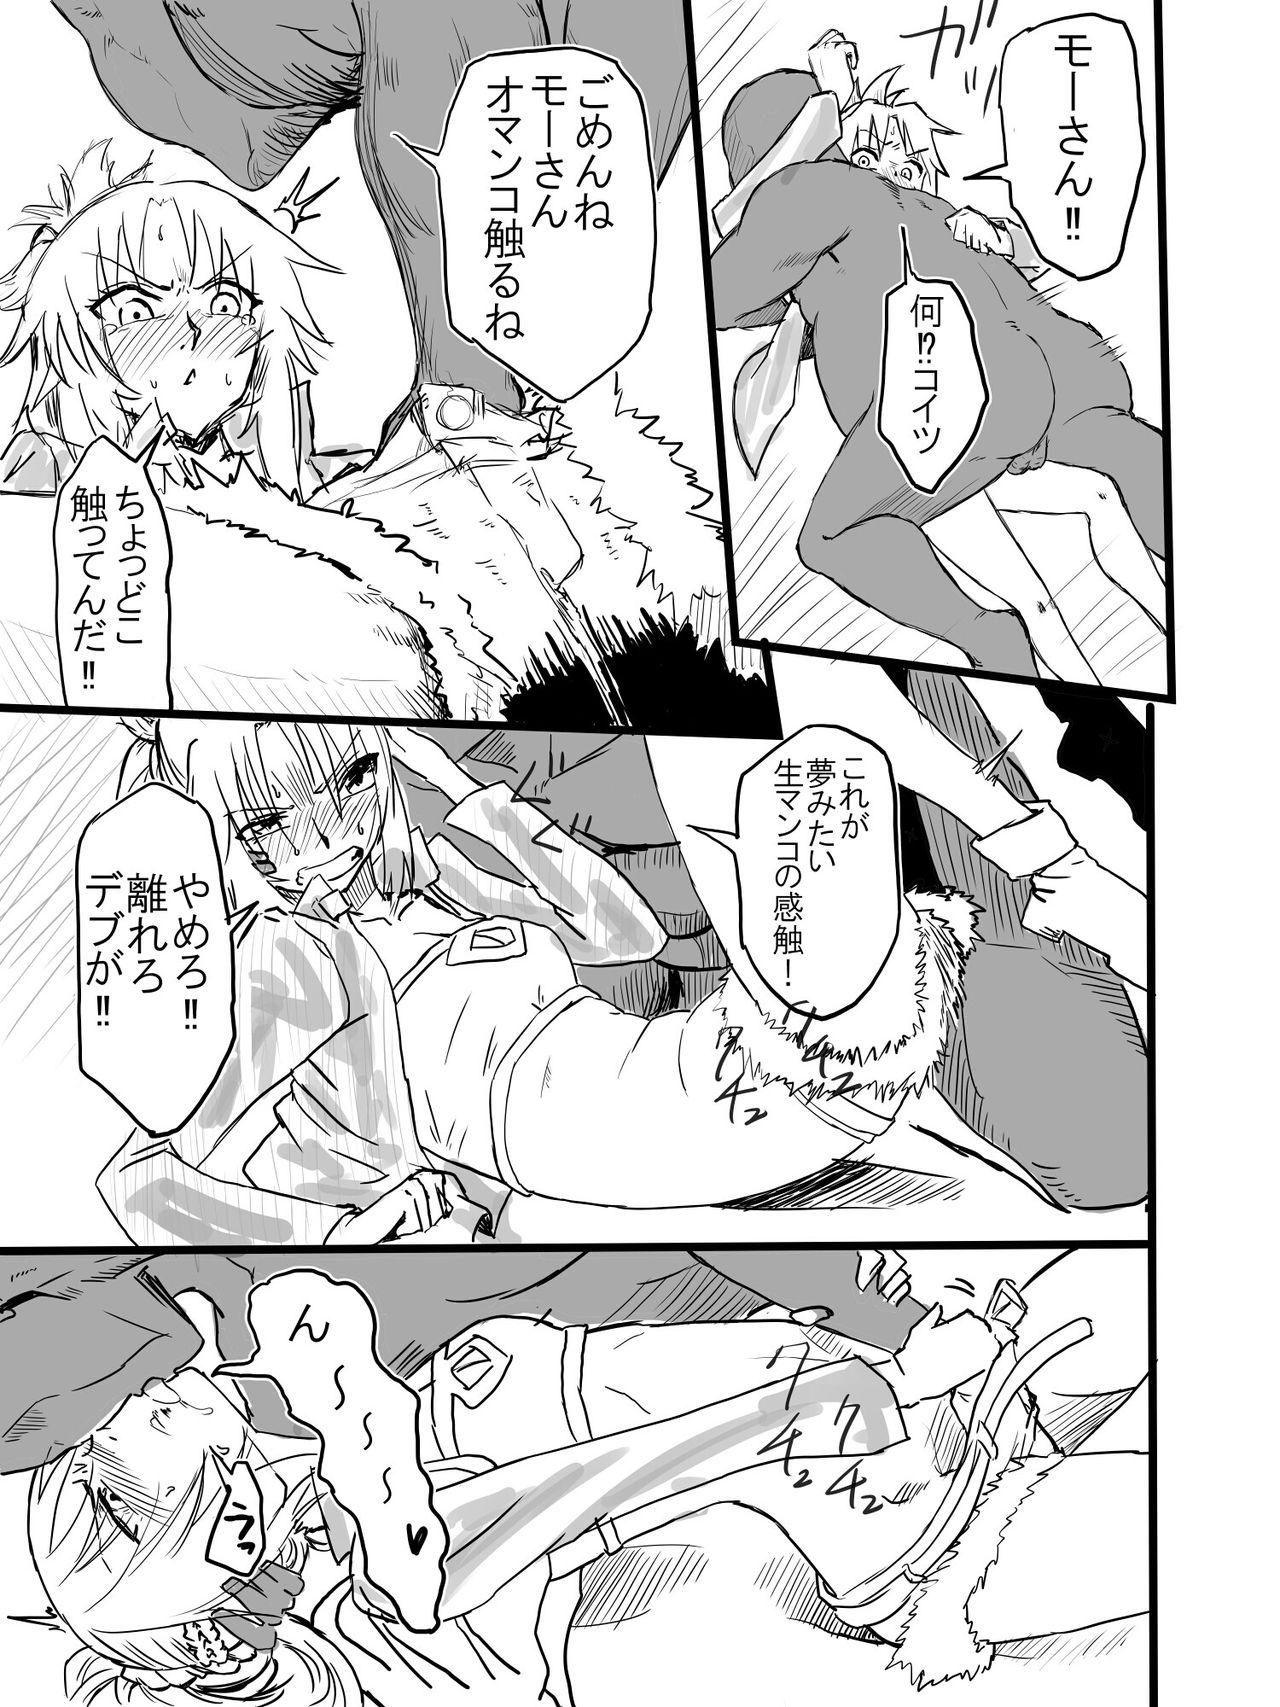 Transex Tousouchuu in Chaldea - Fate grand order Blond - Page 7